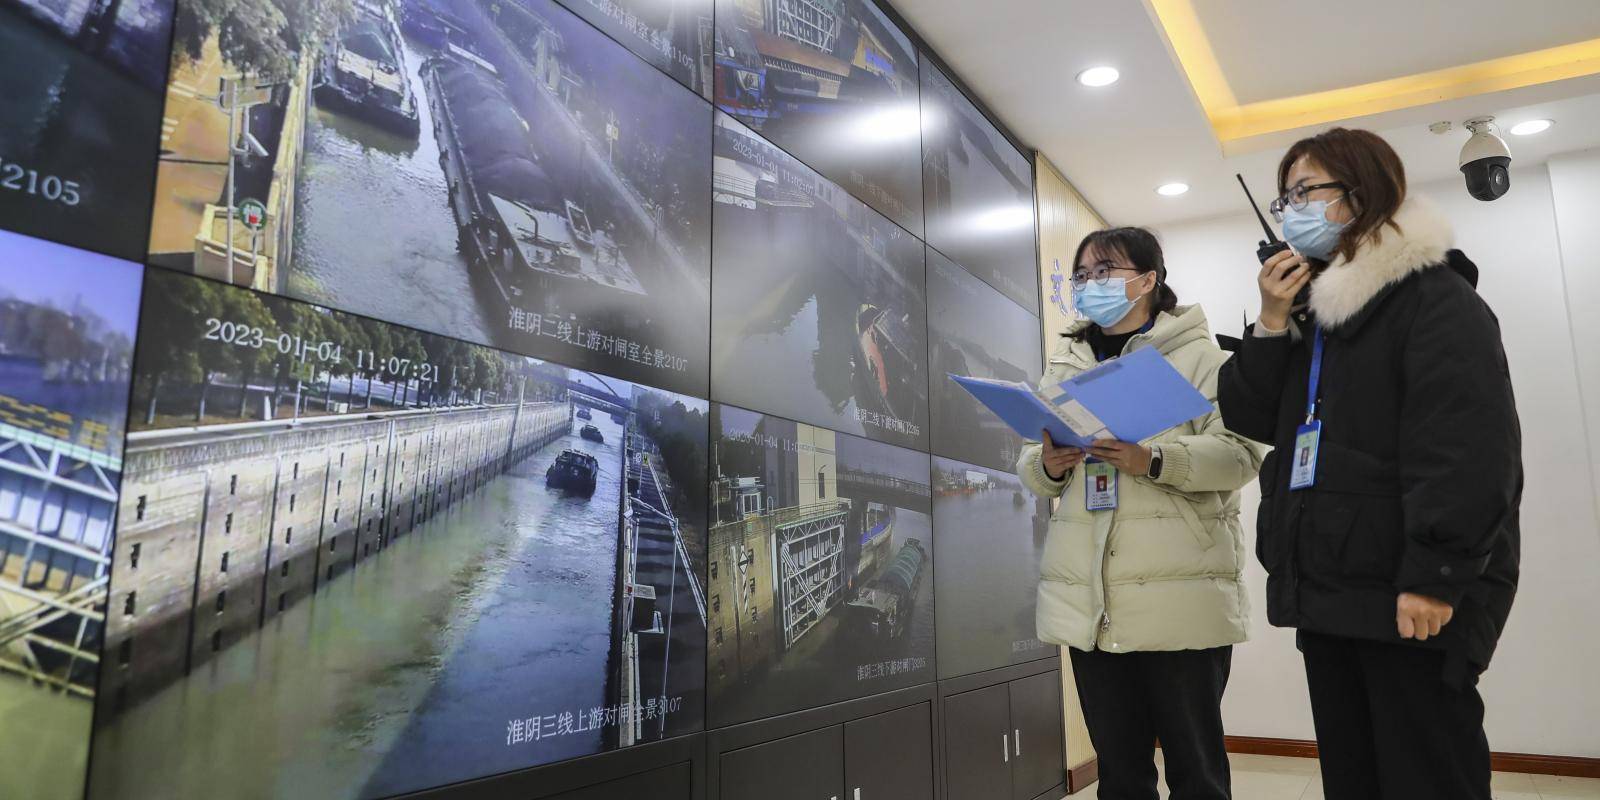 Two women dispatch administrators in warm coats and face masks stand in front of monitors showing images of transport barges on water.